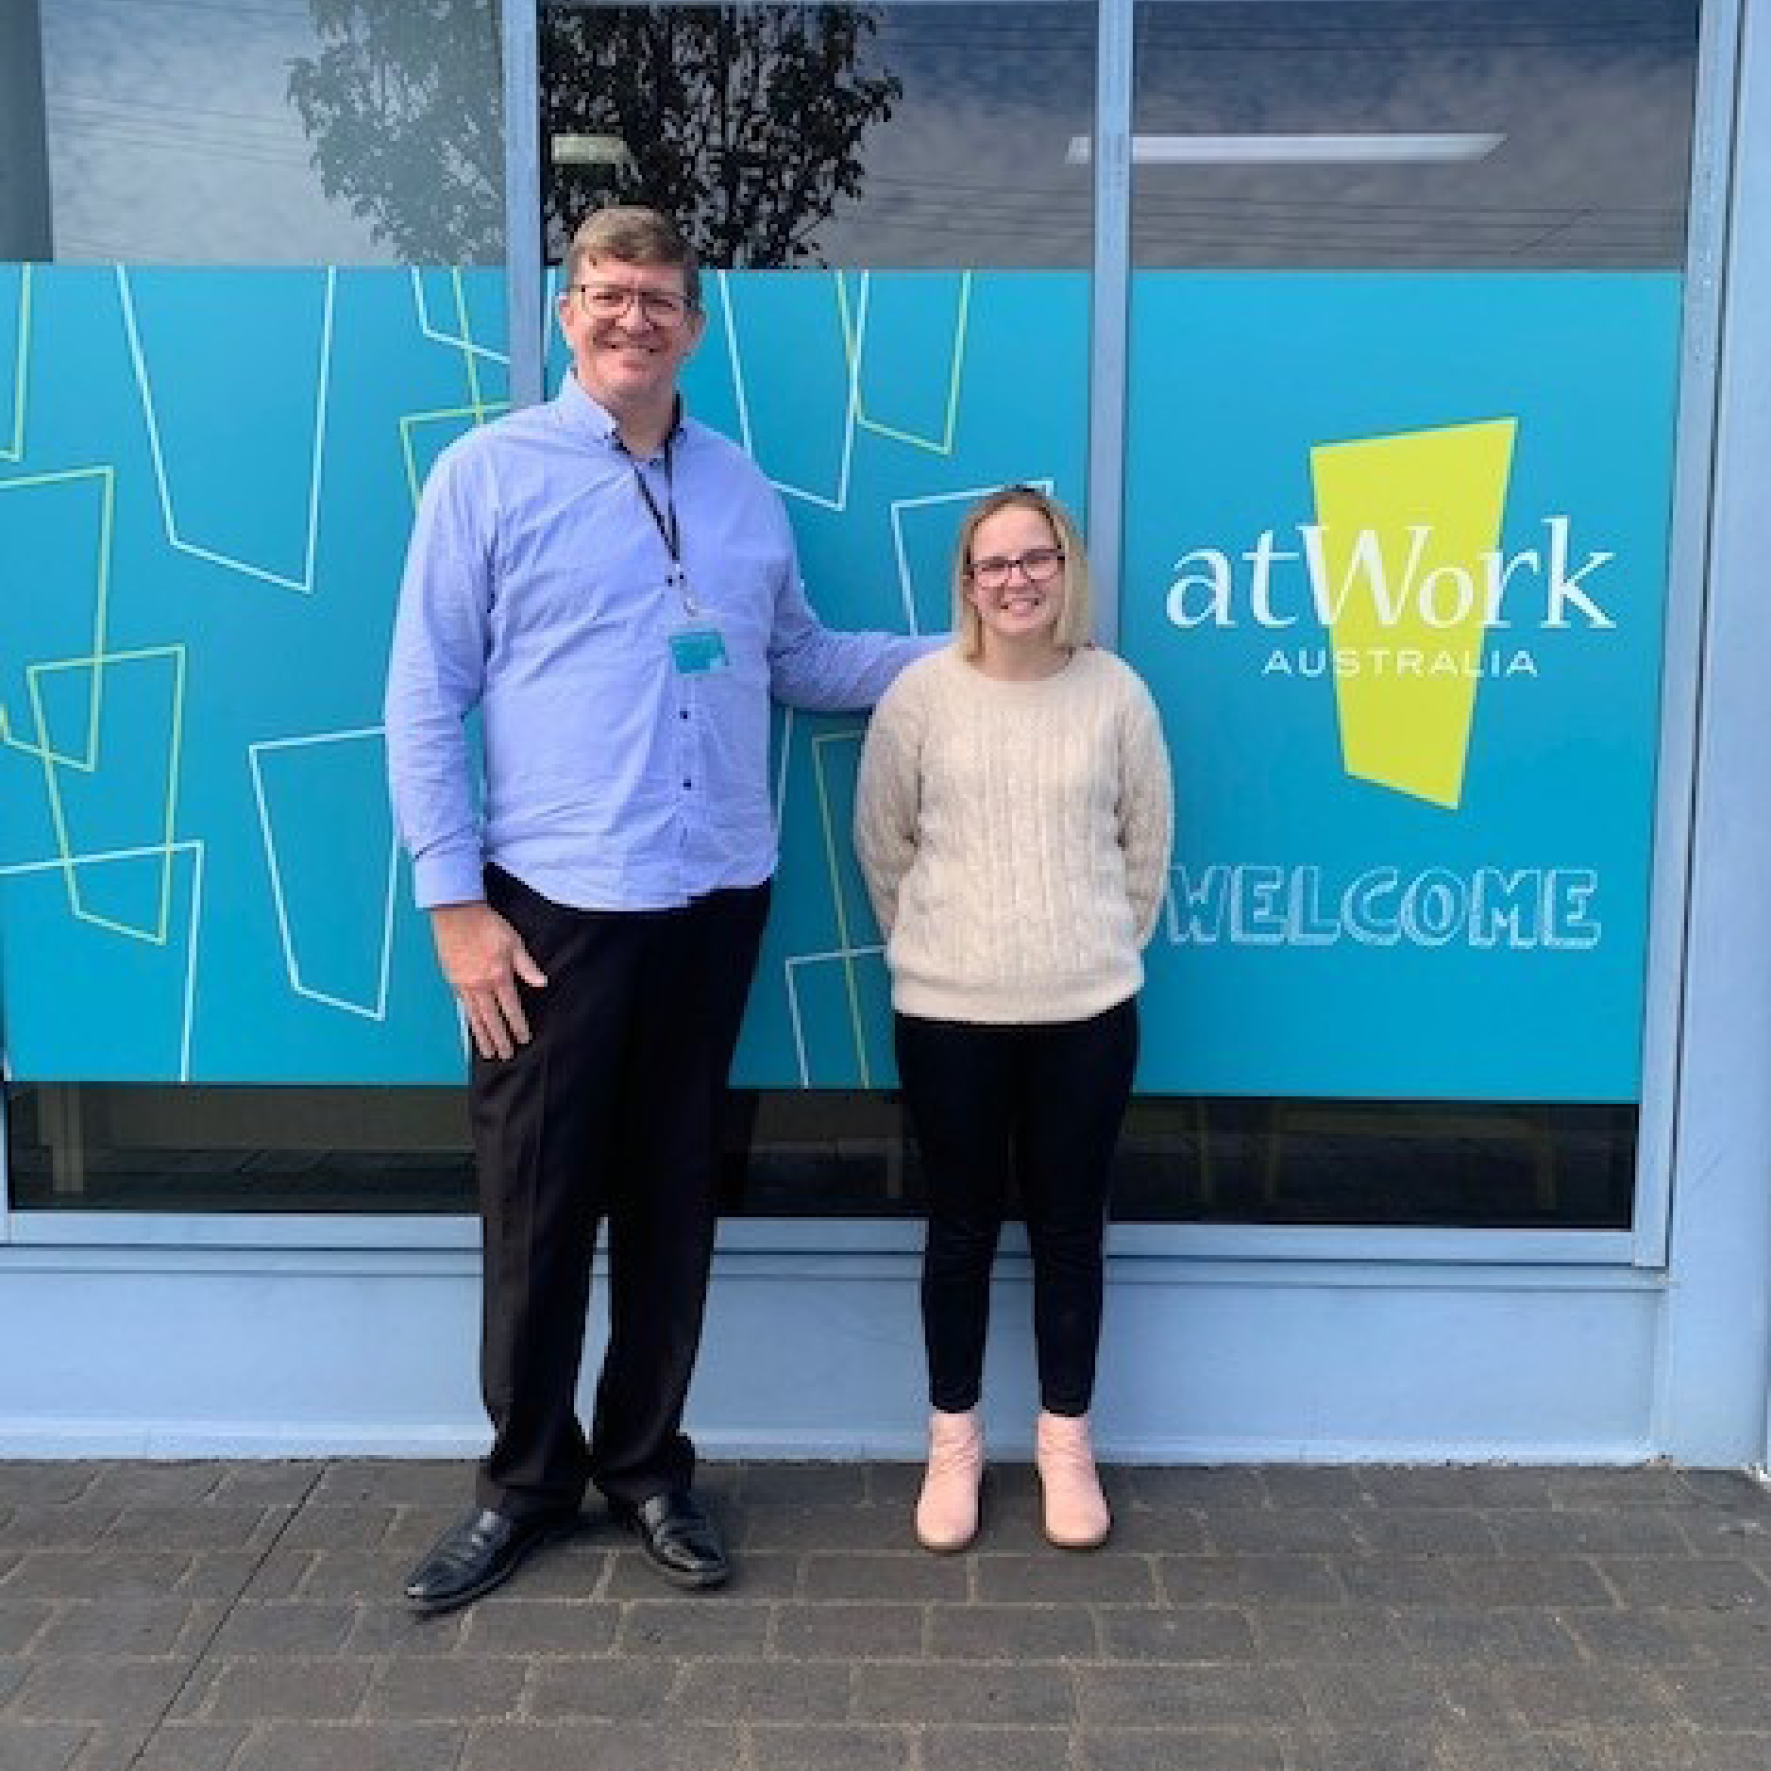 atWork Australia supports Shanae to achieve her employment goals, while addressing local skills shortages on the South Coast